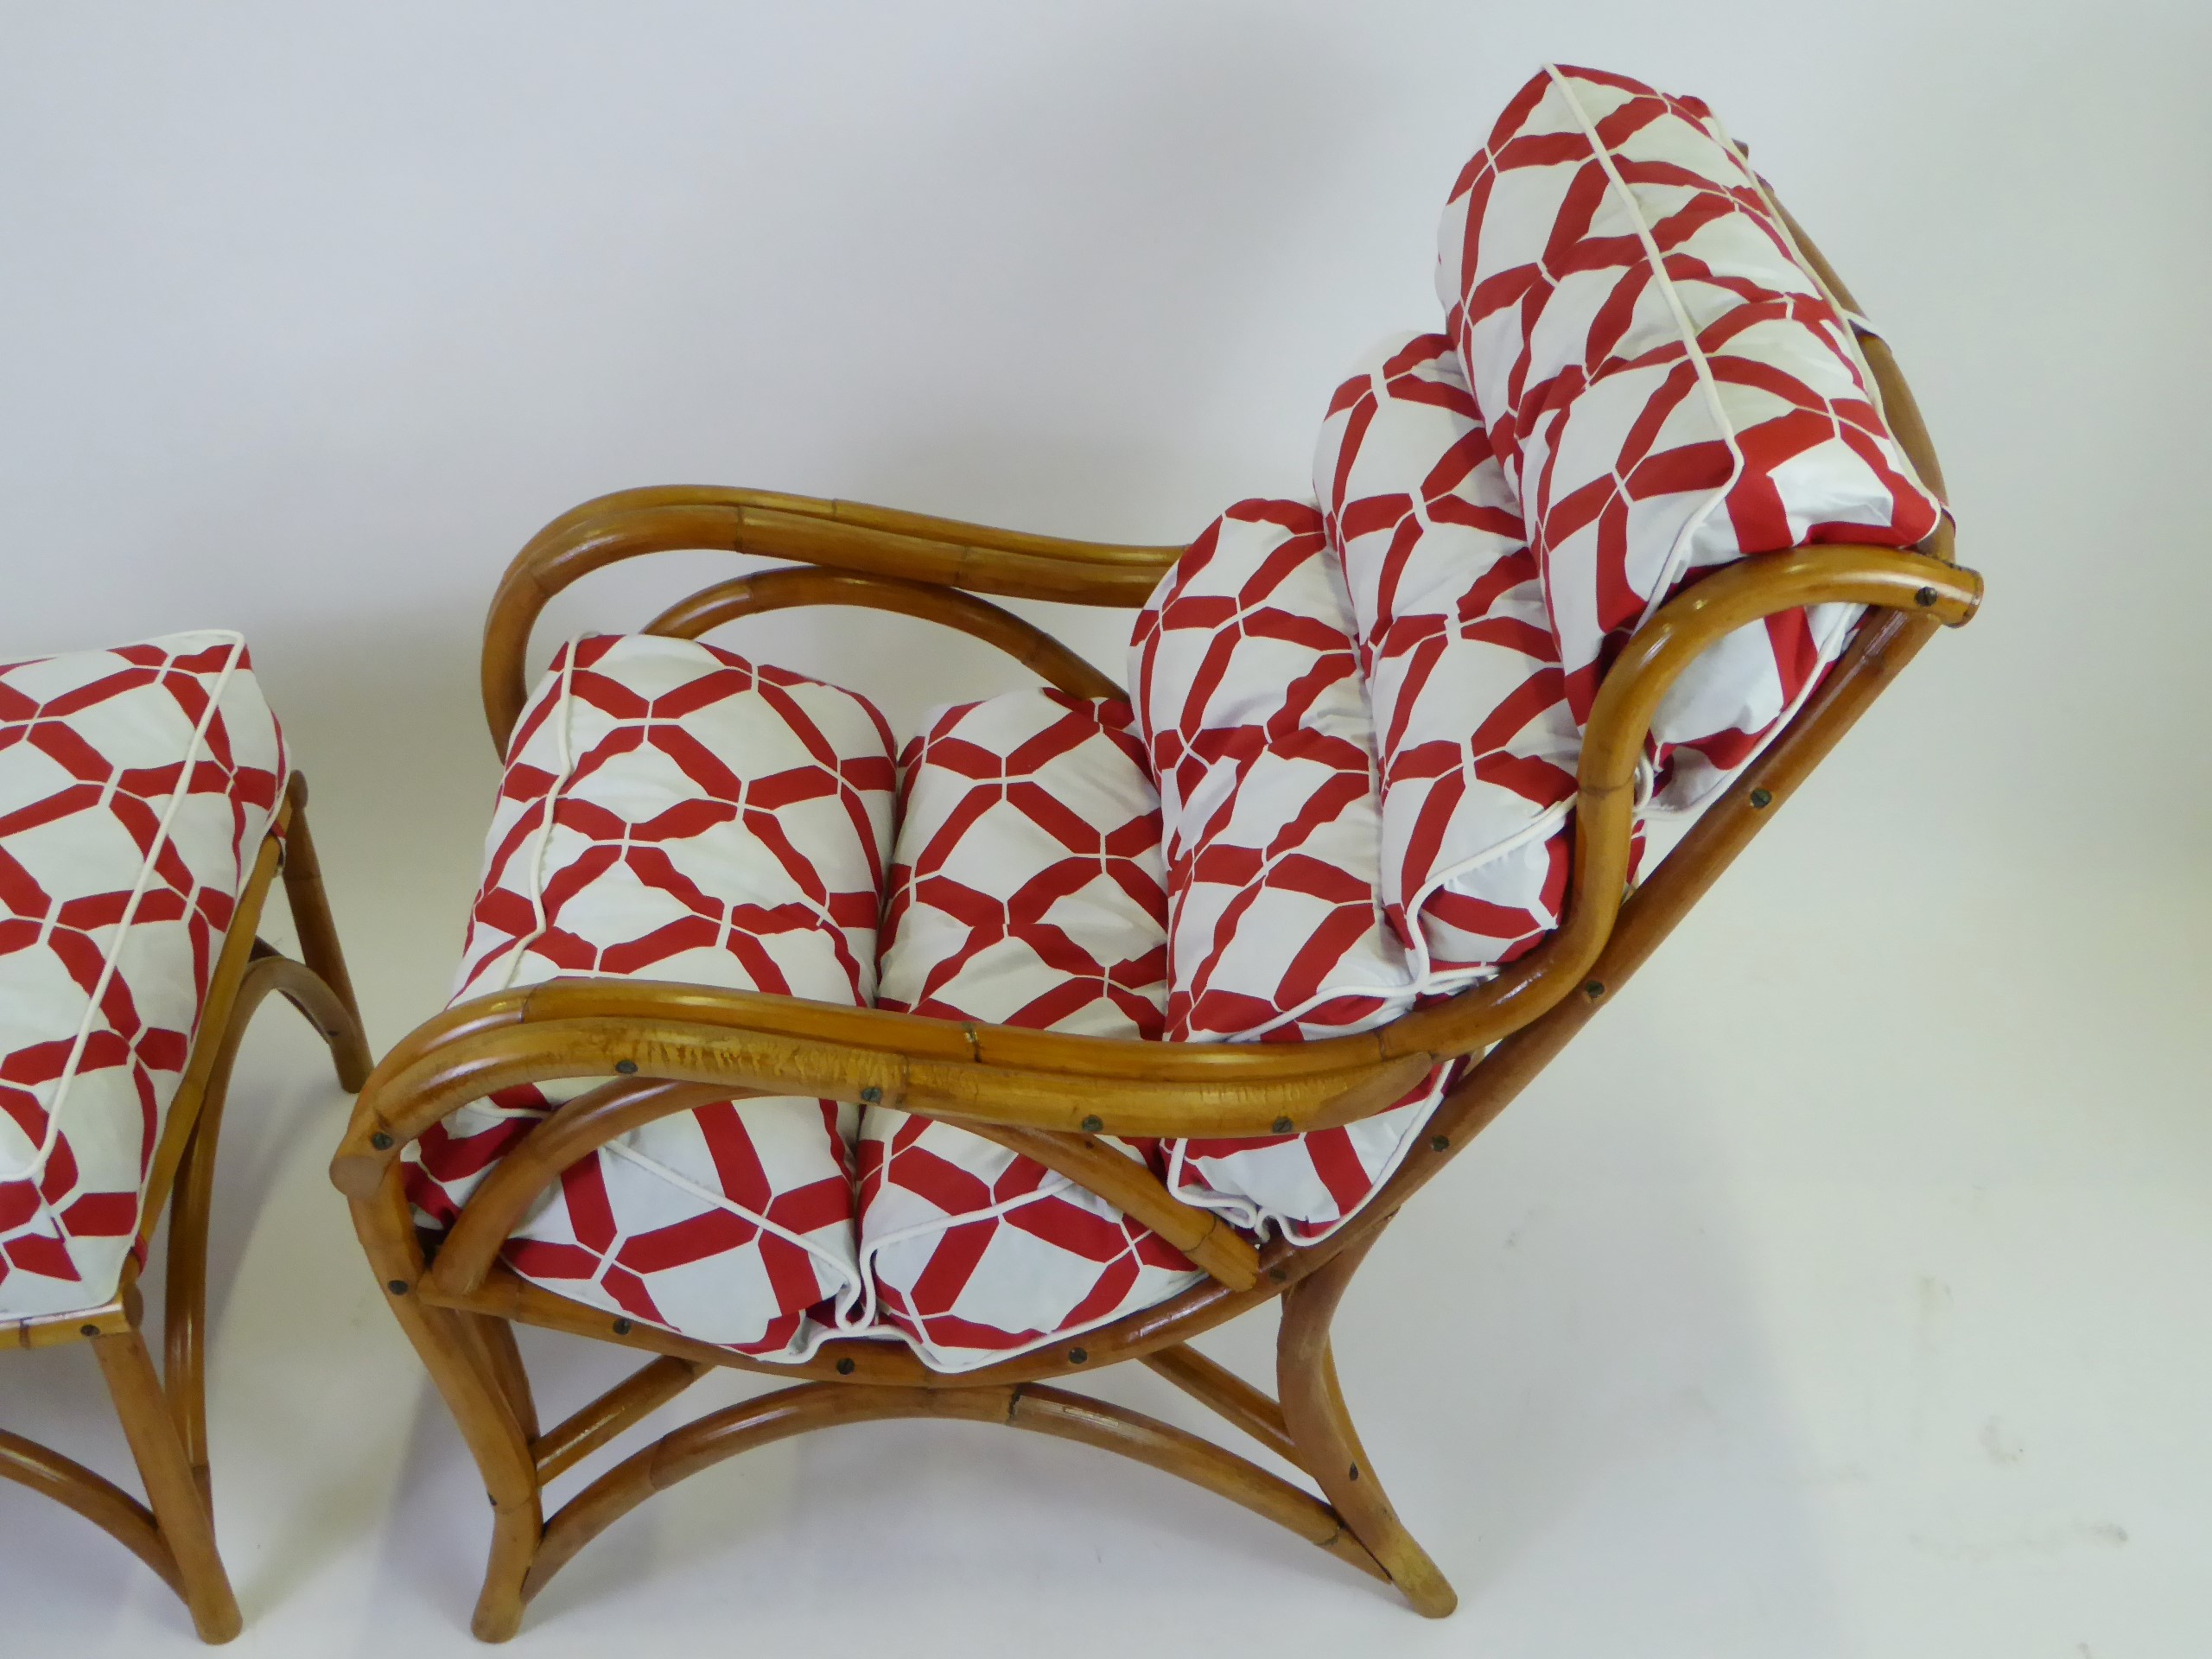 SOLD 1940s Frankl Style Rattan Lounge Chair with Ottoman - Glo Gallery